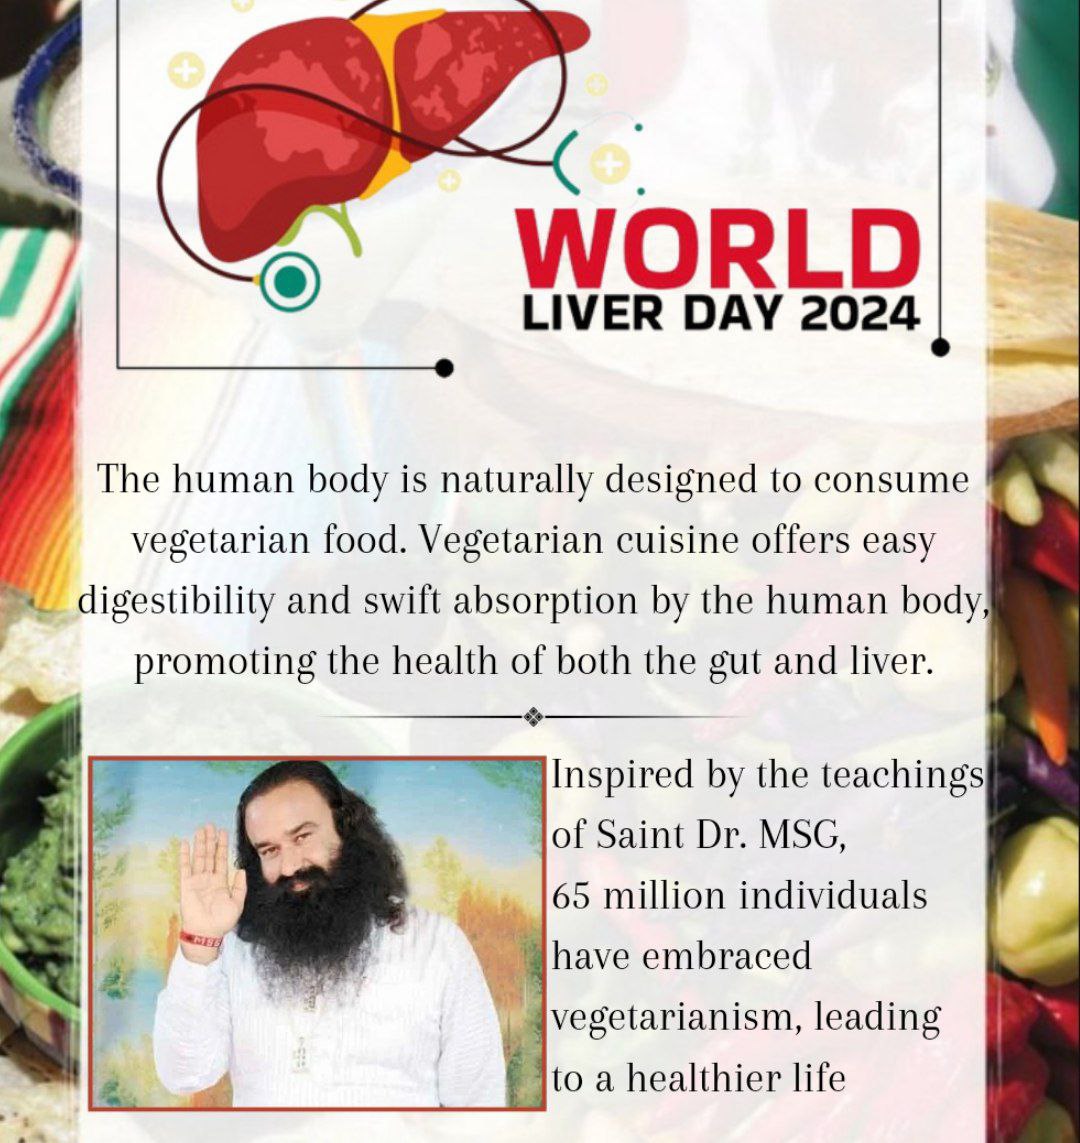 #WorldLiverDay is celebrated every year on 19th April with aim of increasing awareness about Liver Health. Guidance of Saint Dr MSG Insan, DSS volunteers have made their lives healthy by not consuming alcohol, adopting vegetarian food & practicing meditation. #WorldLiverDay